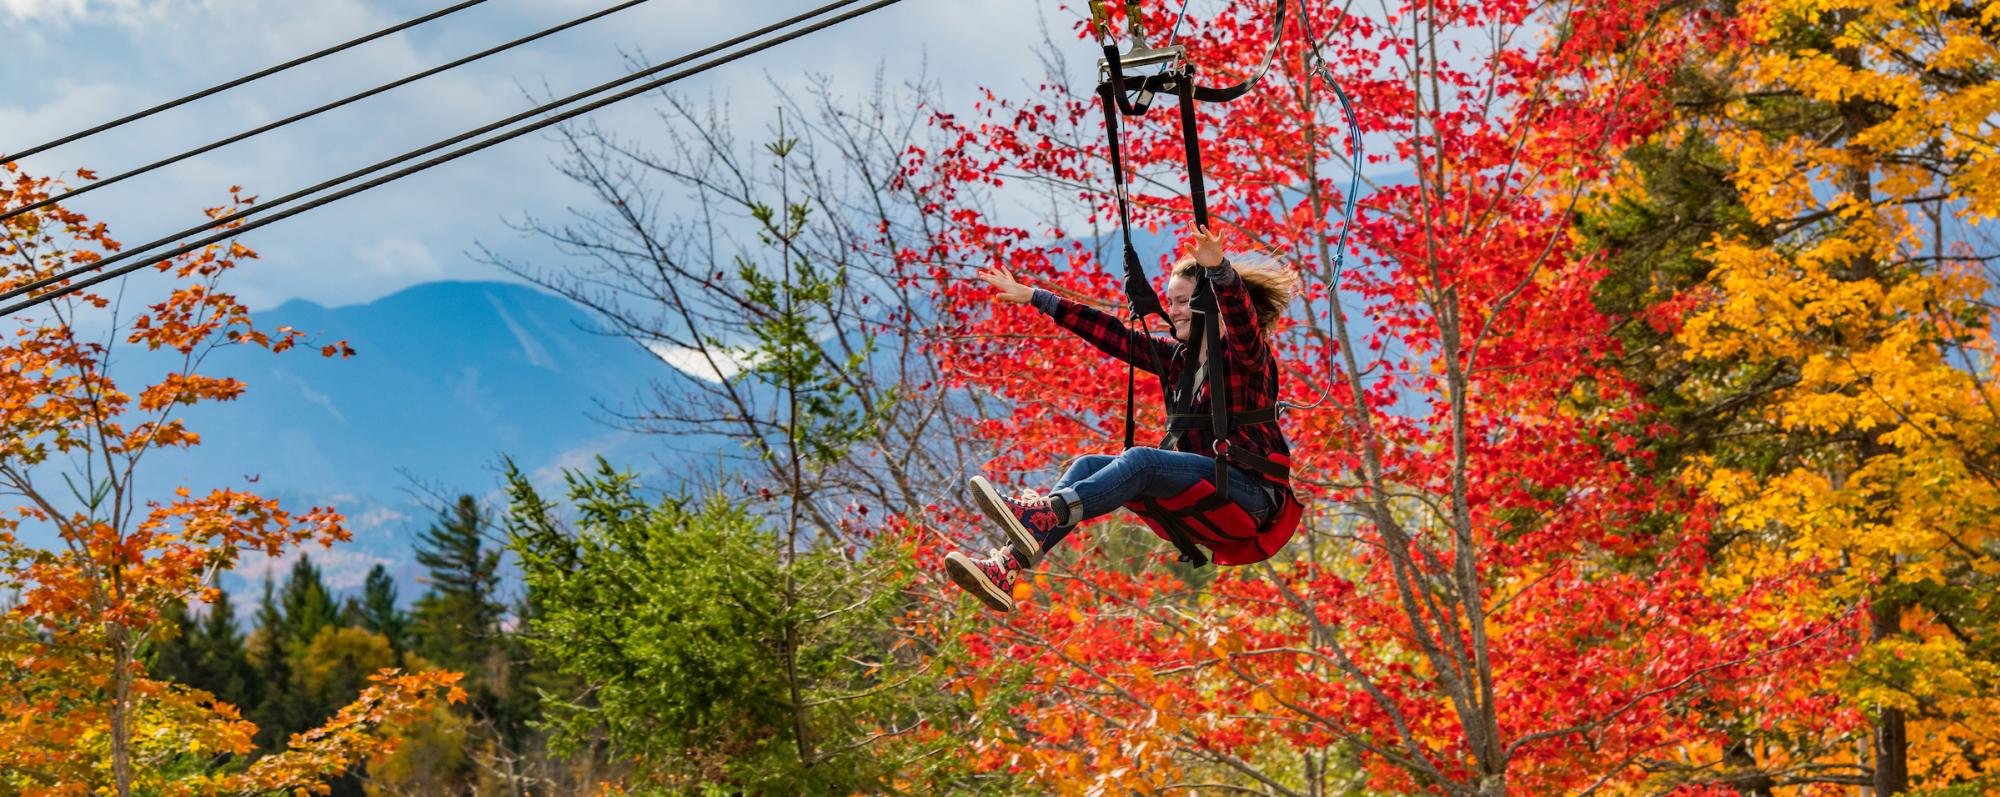 A woman with blonde hair and a red flannel shirt rides down a zip line at the Olympic Jumping Complex during peak fall foliage season